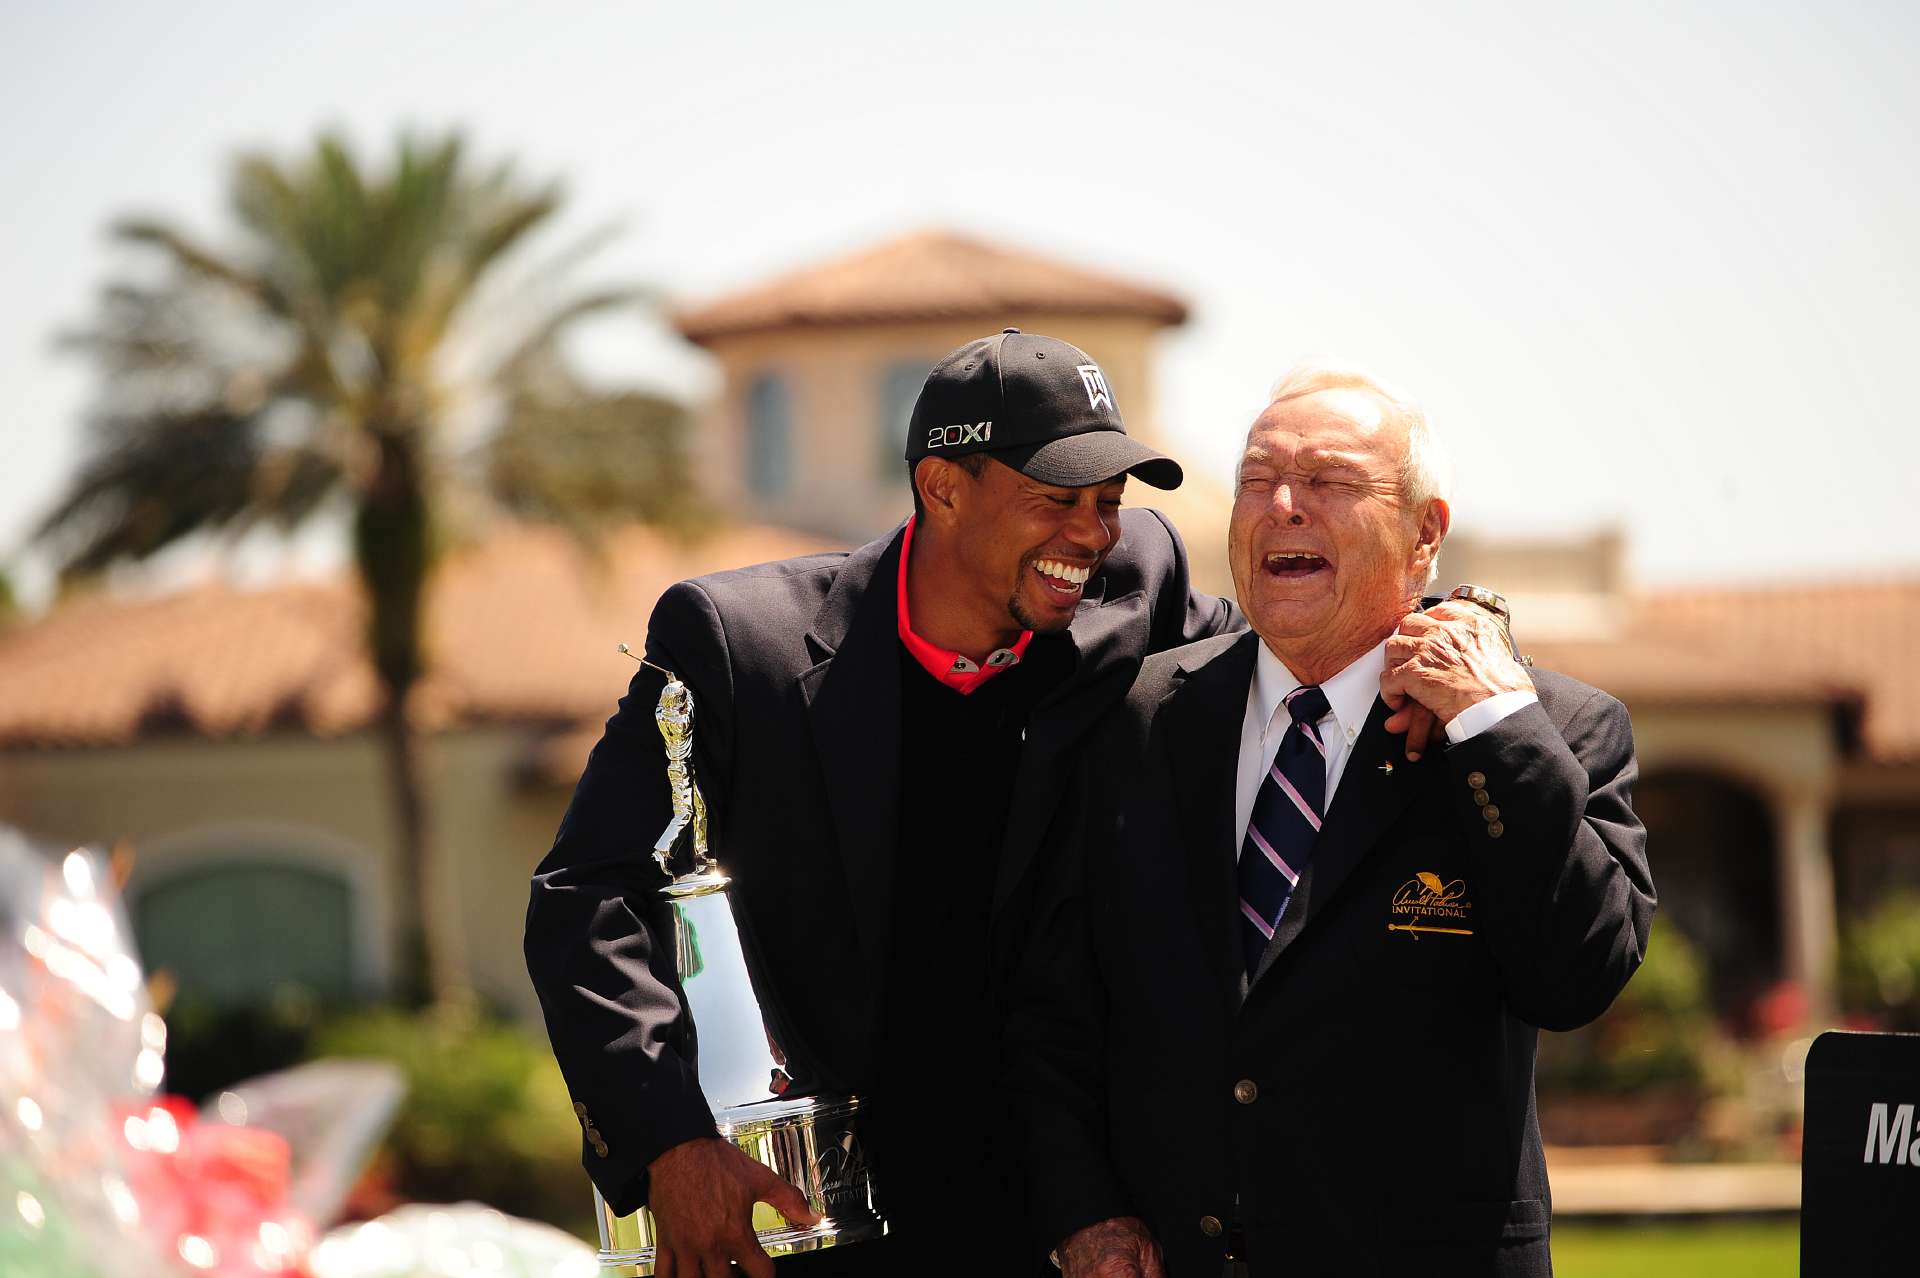 Tiger Woods and Arnold Palmer laughing during the Arnold Palmer Invitational at Bay Hill Club and Lodge in Orlando, Fla on March 25, 2013.